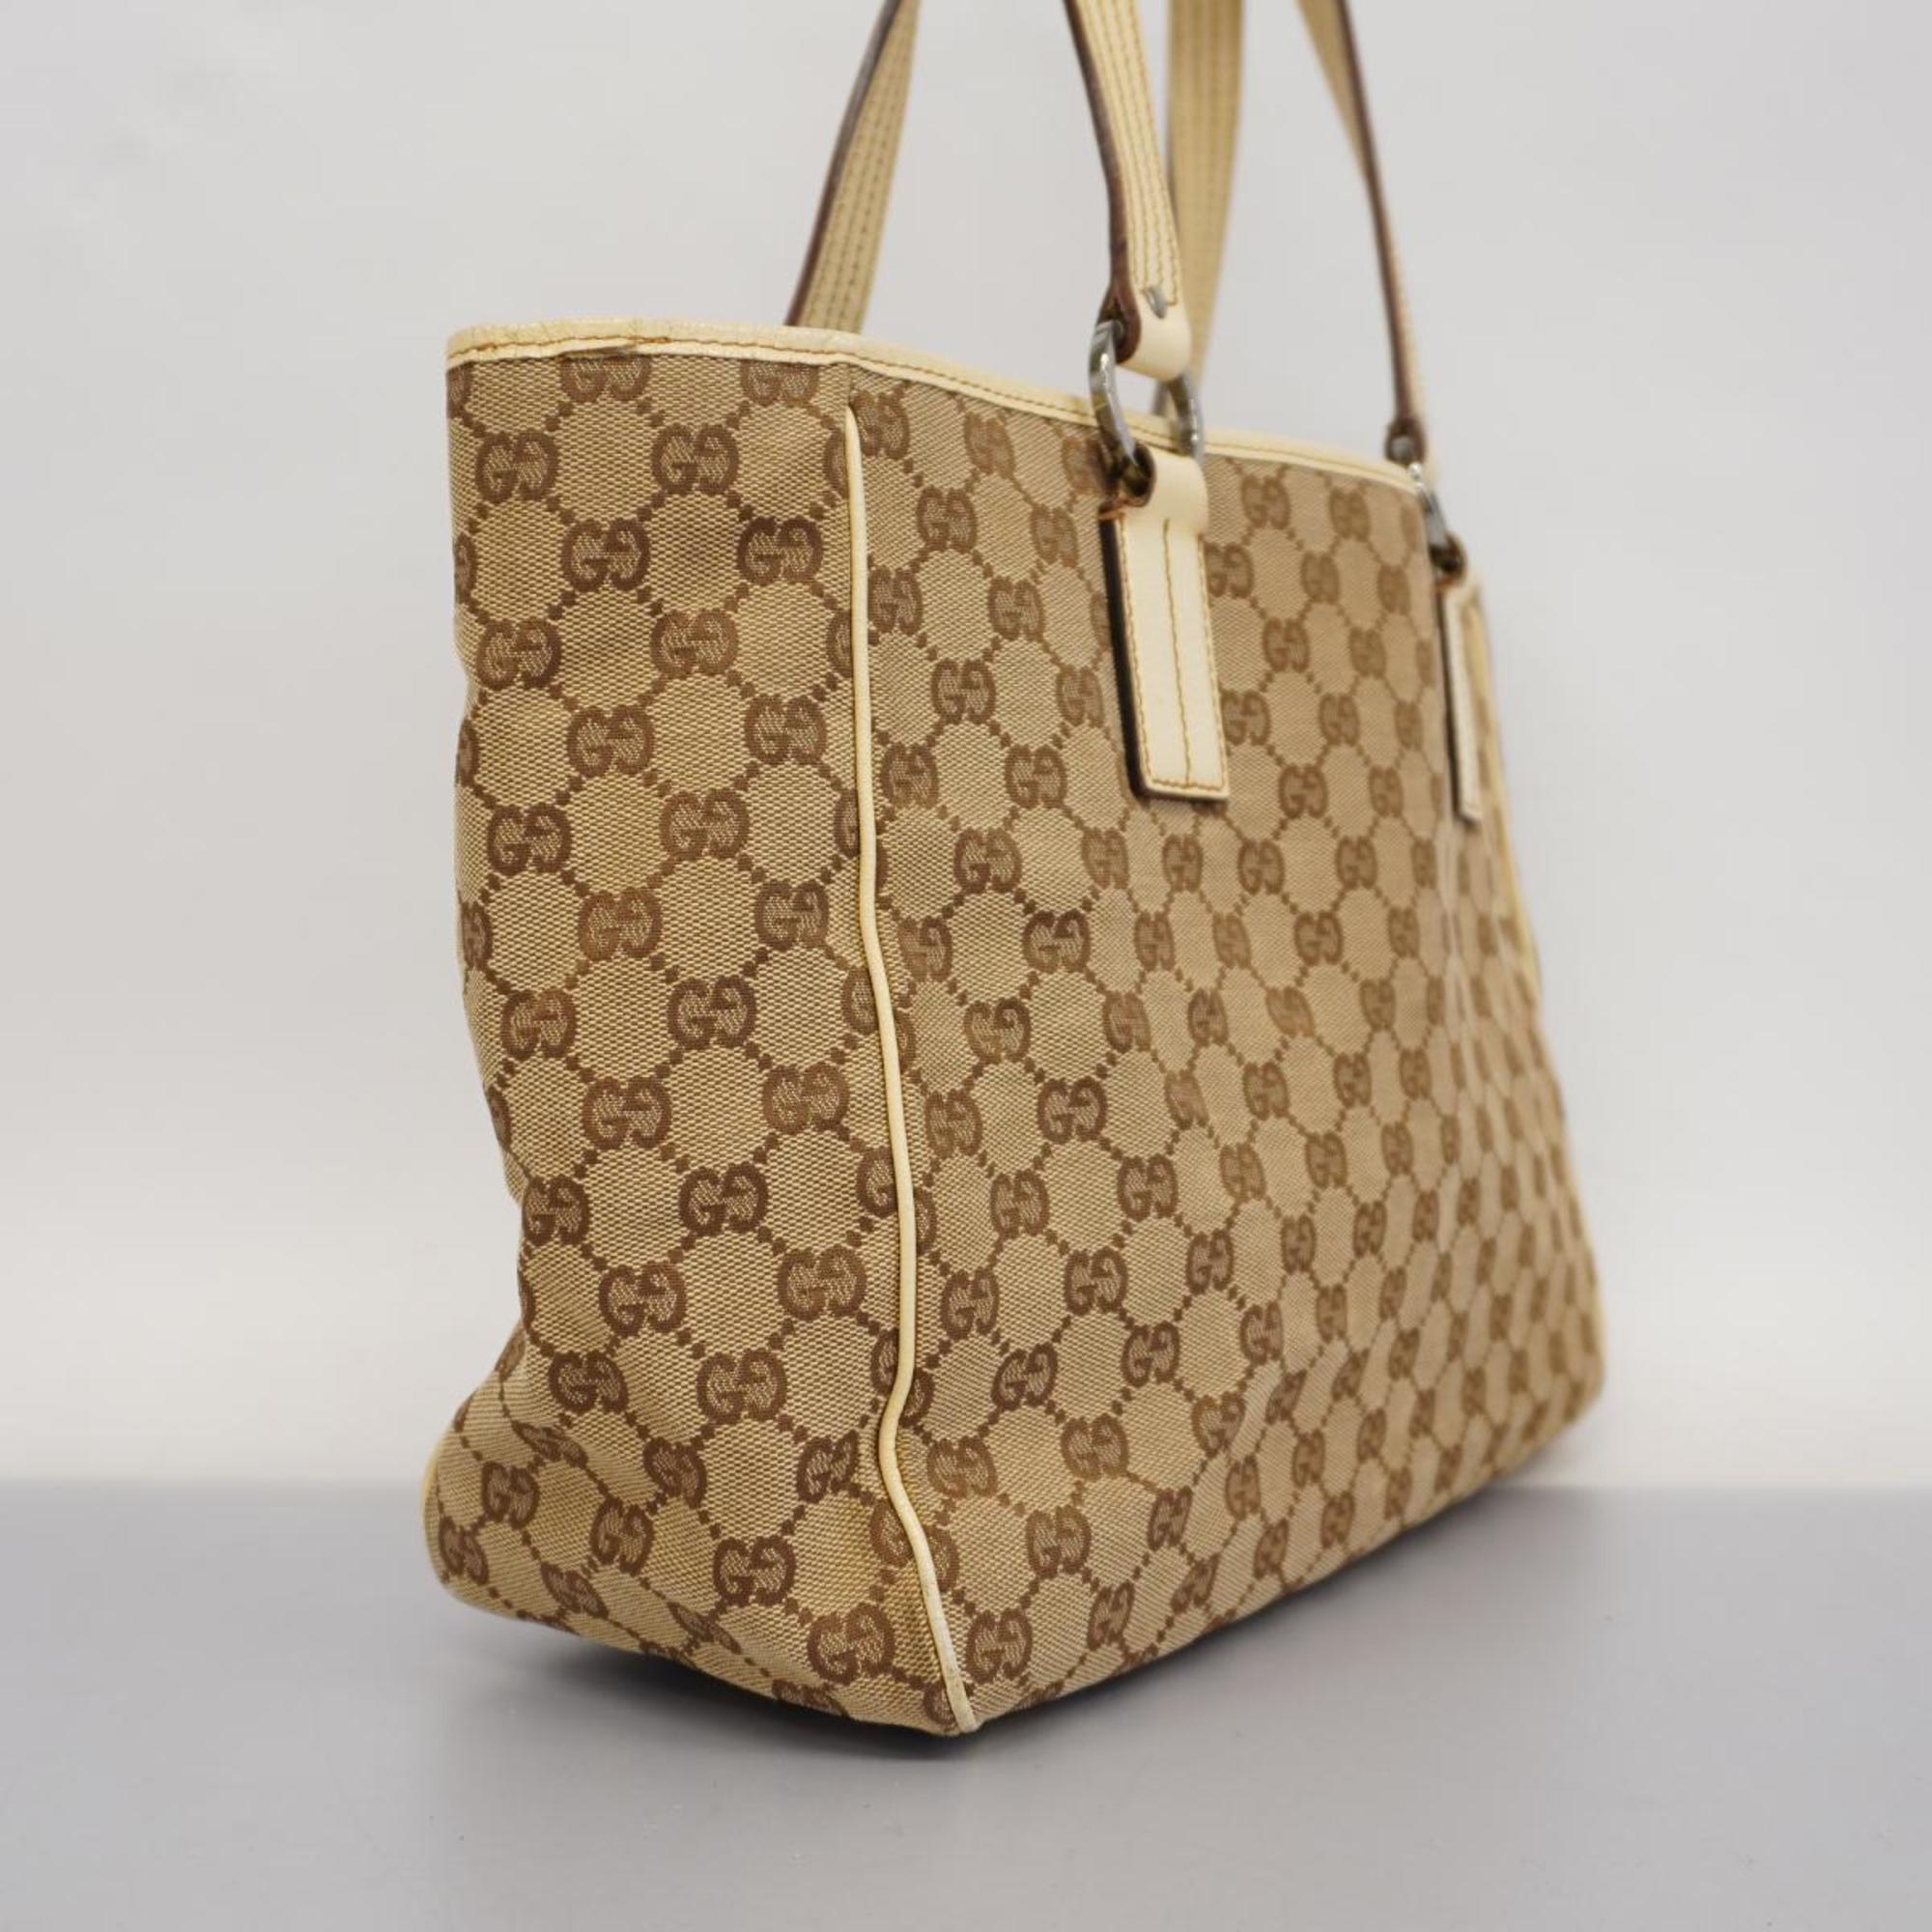 Gucci Tote Bag GG Canvas 113017 Ivory Brown Women's